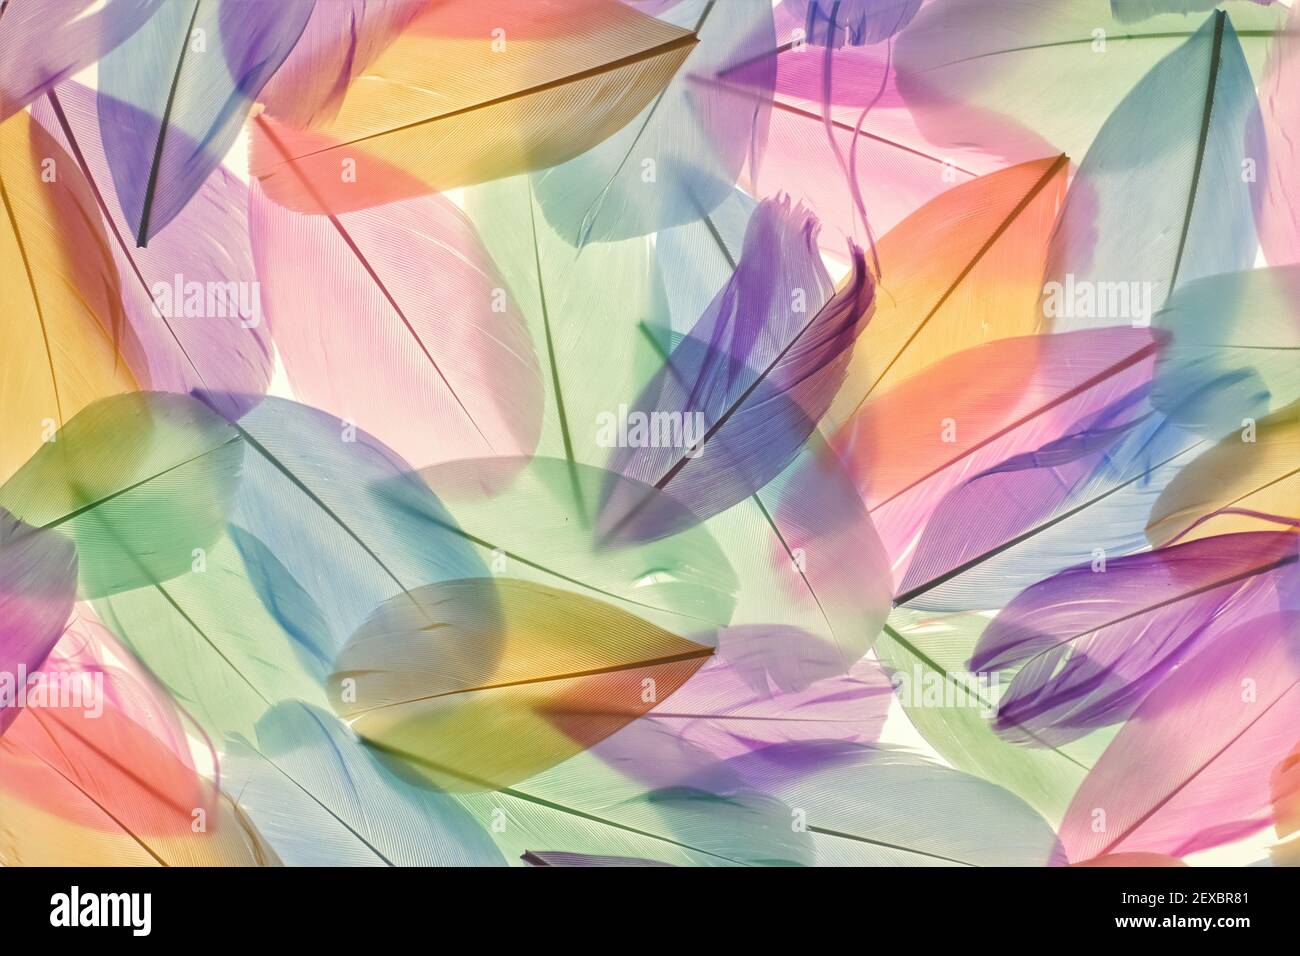 Feathers multicolored background in pastel colors. Feathers pattern. Natural pastel feathers set in muted colors.Beautiful natural feathers surface Stock Photo